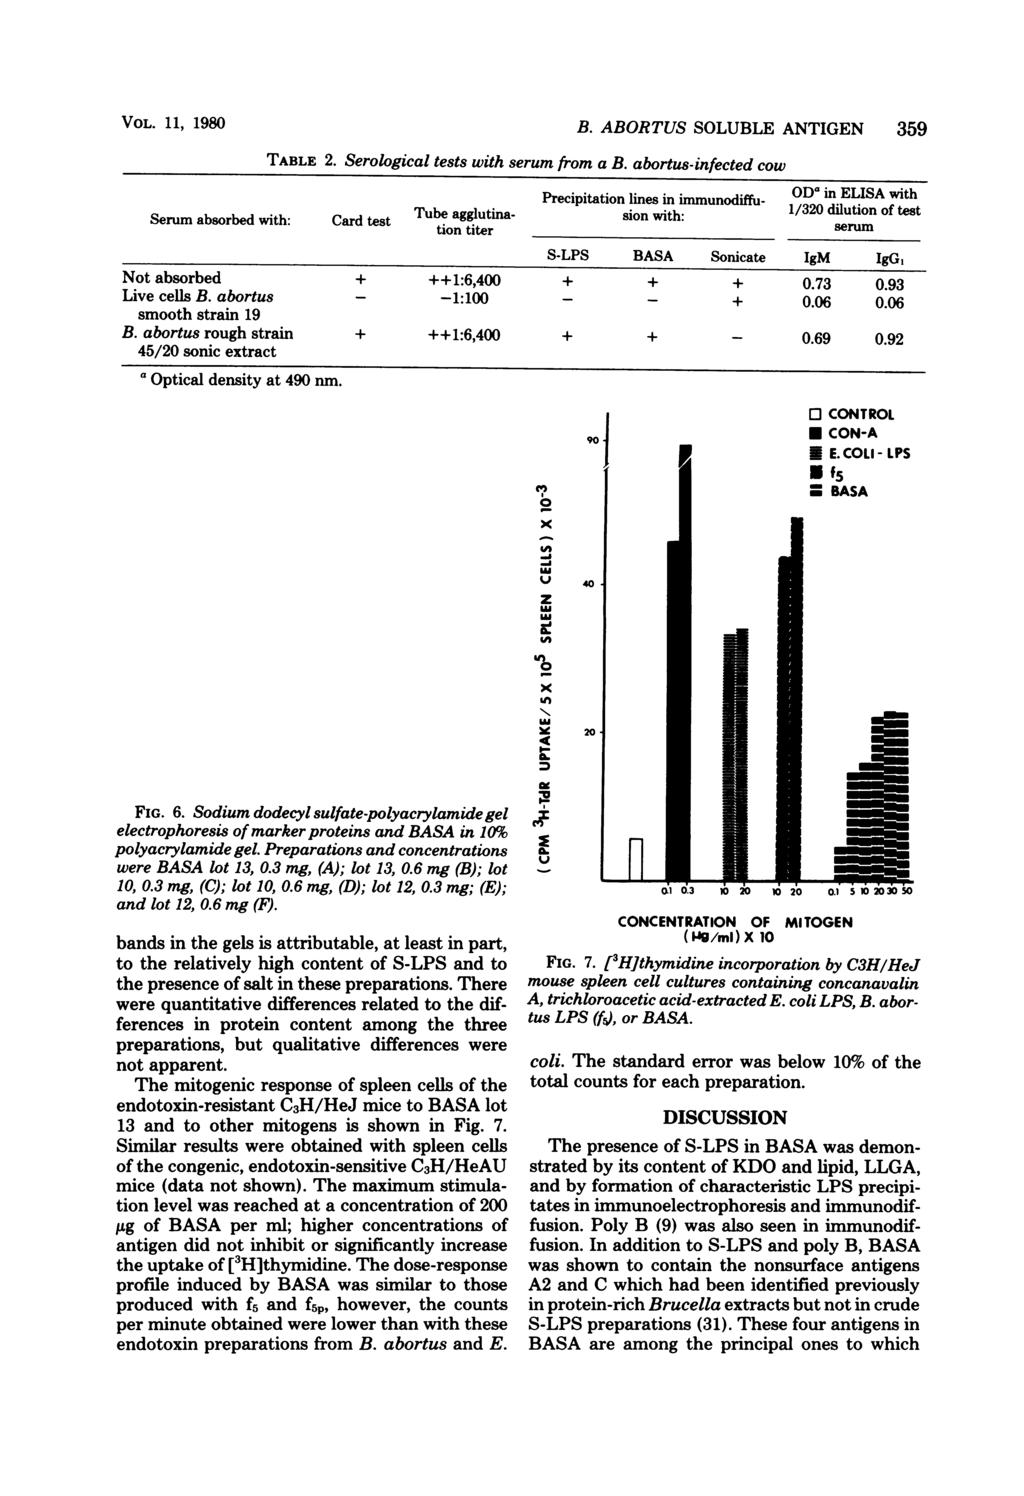 VOL. 11, 1980 TABLE 2. B. ABORTUS SOLUBLE ANTIGEN 359 Serological tests with serum from a B.